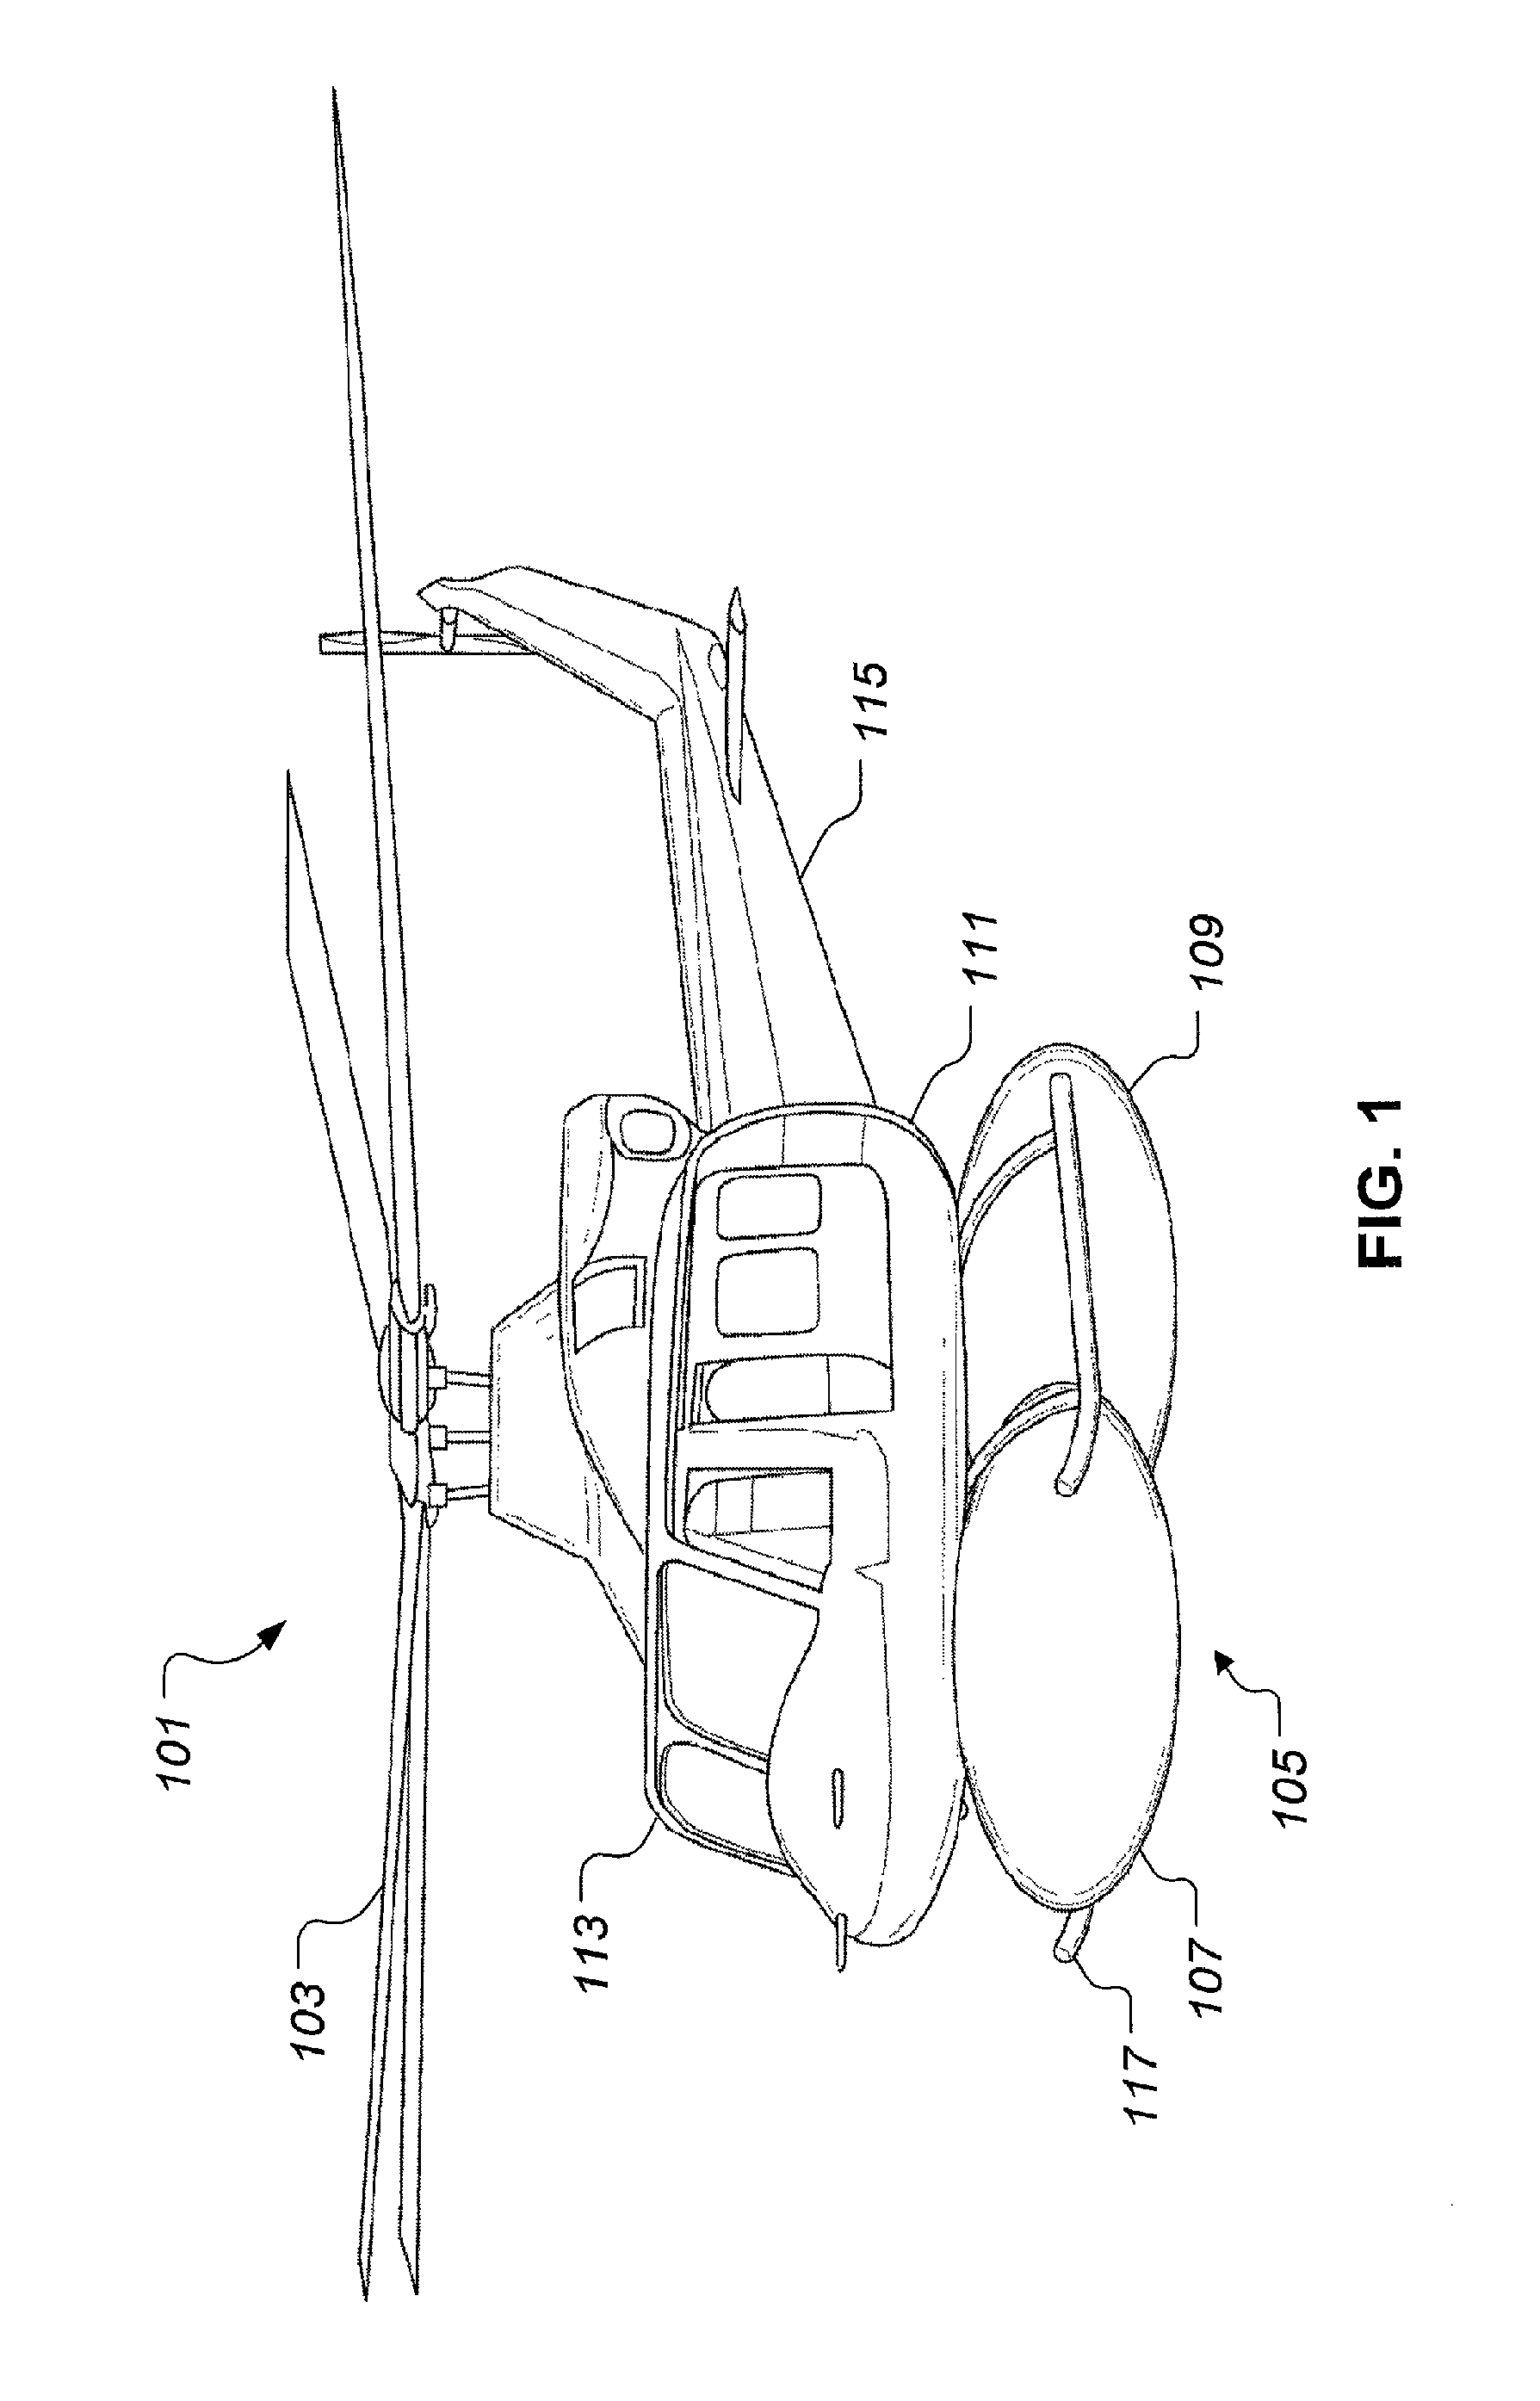 Active vent and re-inflation system for a crash attenuation airbag